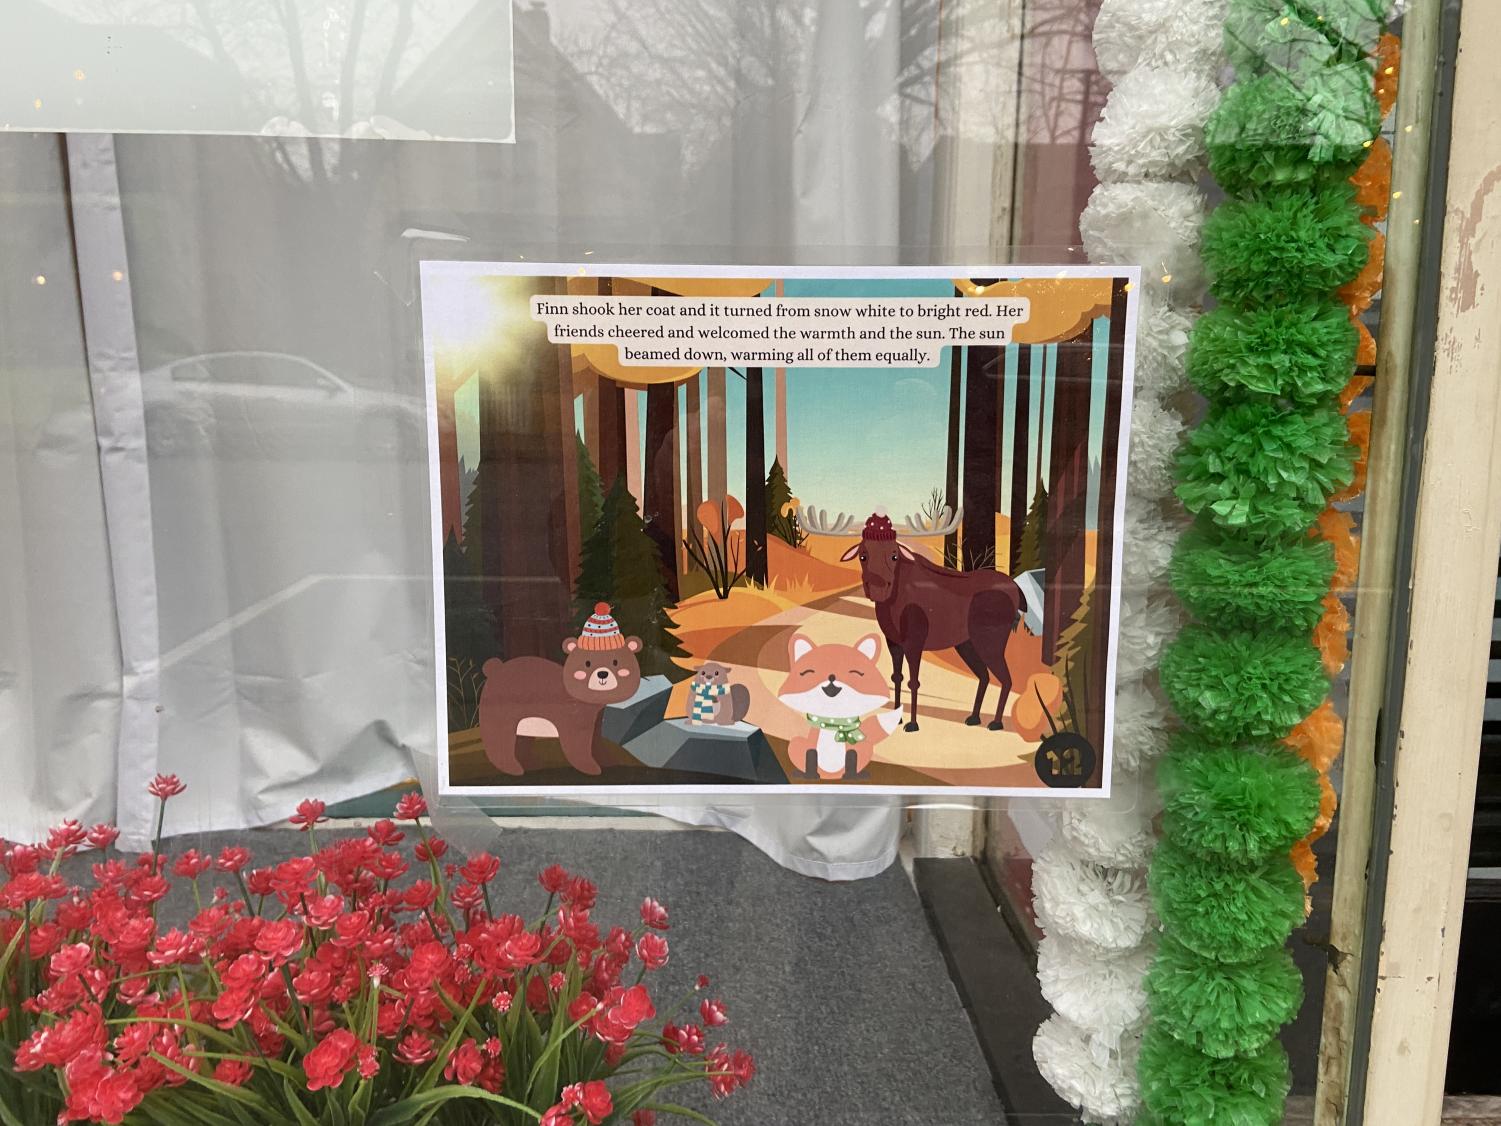 A+sign+hangs+in+a+window+depicting+a+cartoon+fox%2C+bear+and+horse.